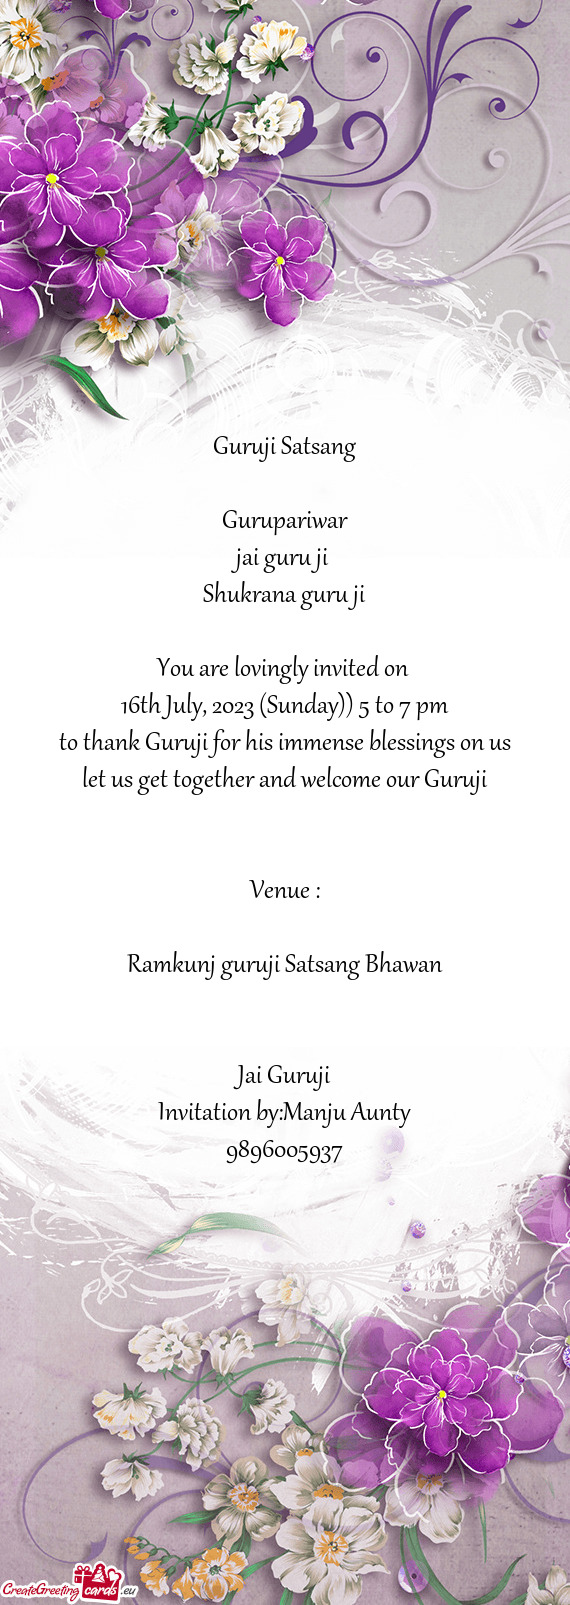 16th July, 2023 (Sunday)) 5 to 7 pm